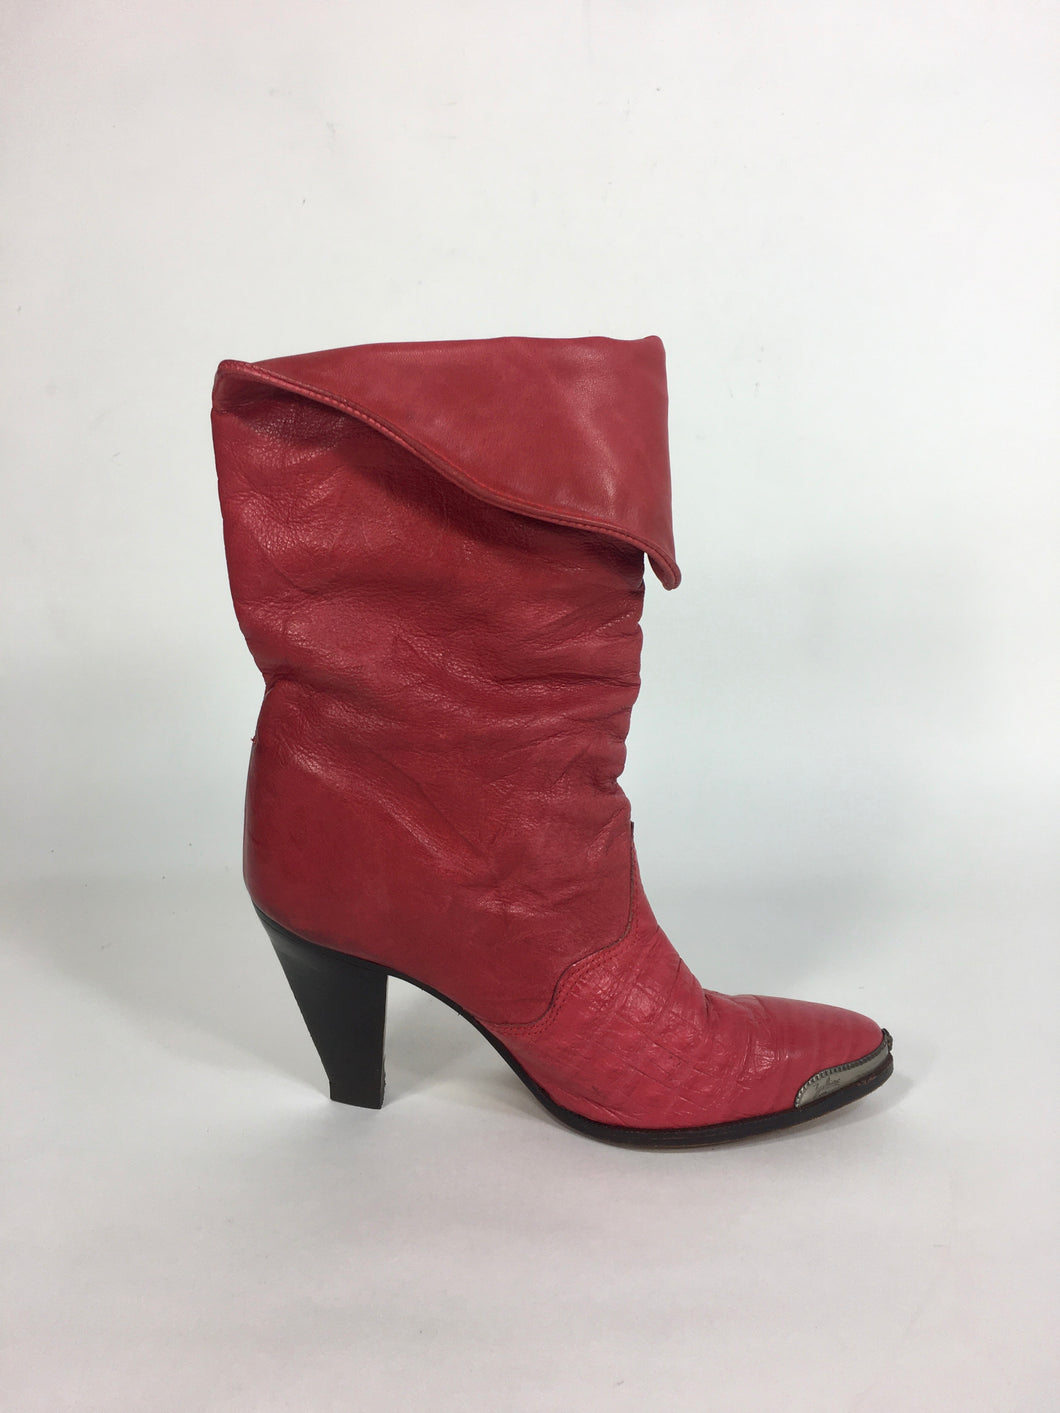 1980’s-90’s fiery red leather fold-over boots from Zodiac size 5.5